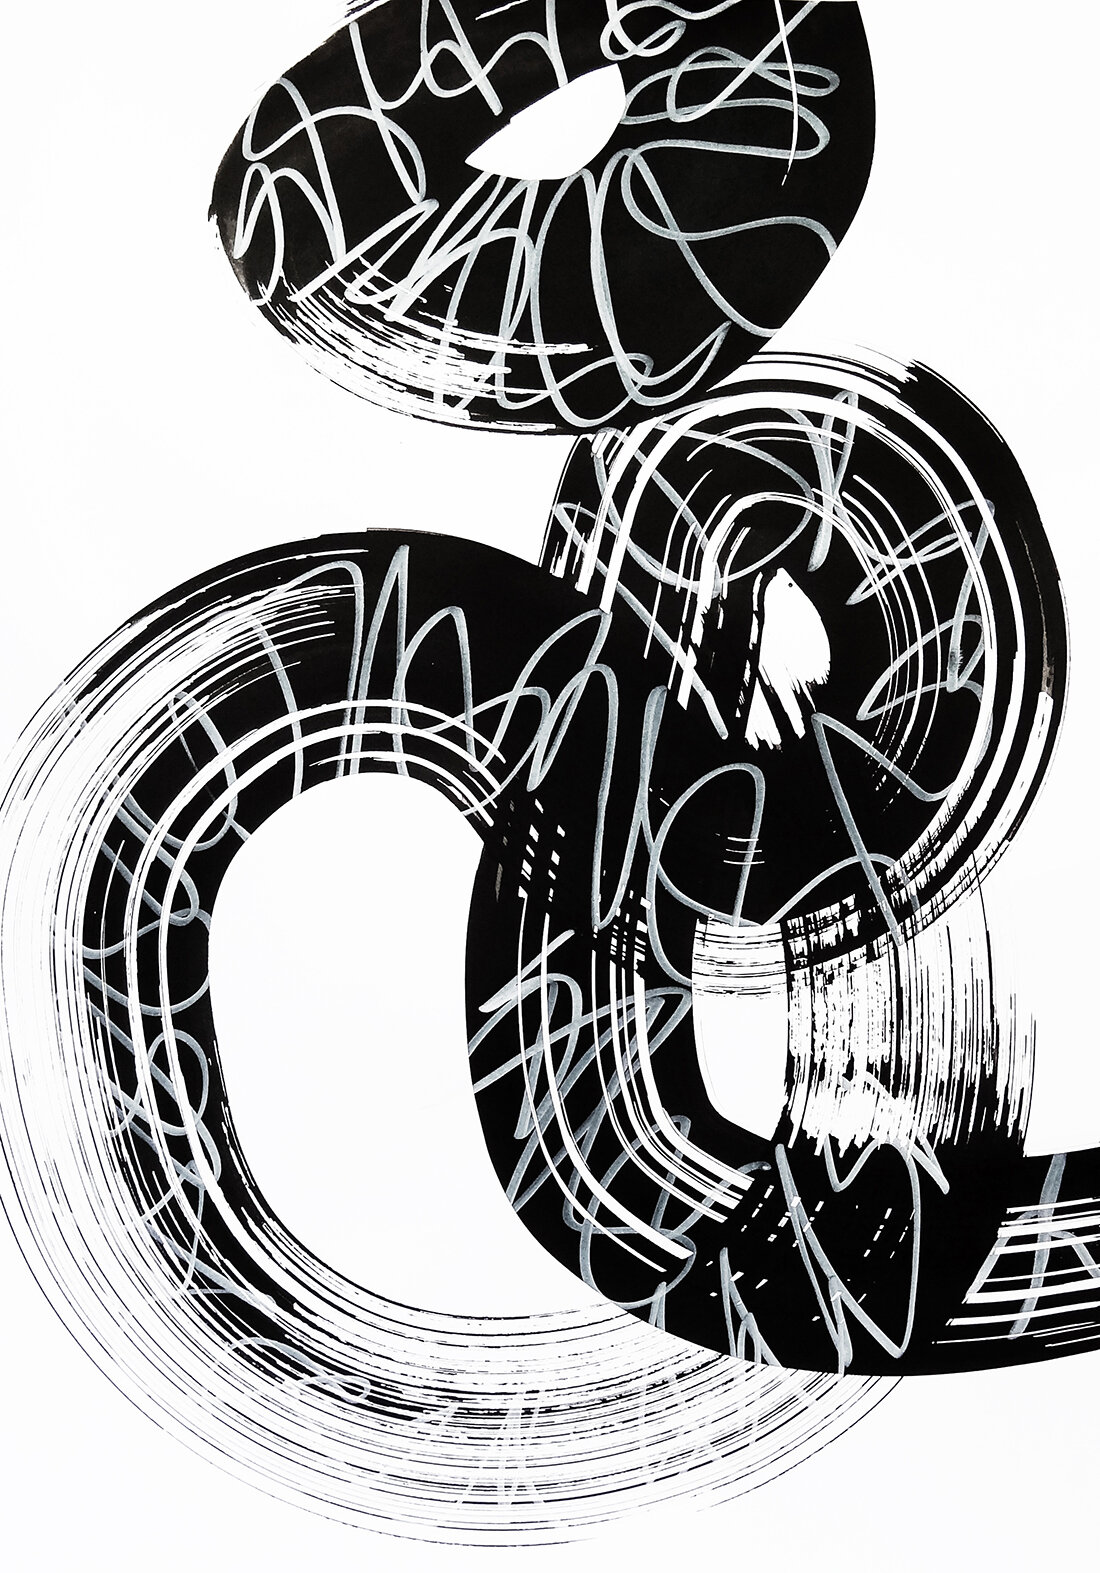  Untitled, 2020 strokes series calligraphy ink on paper 42,0 x 29,7 cm (15-20) 